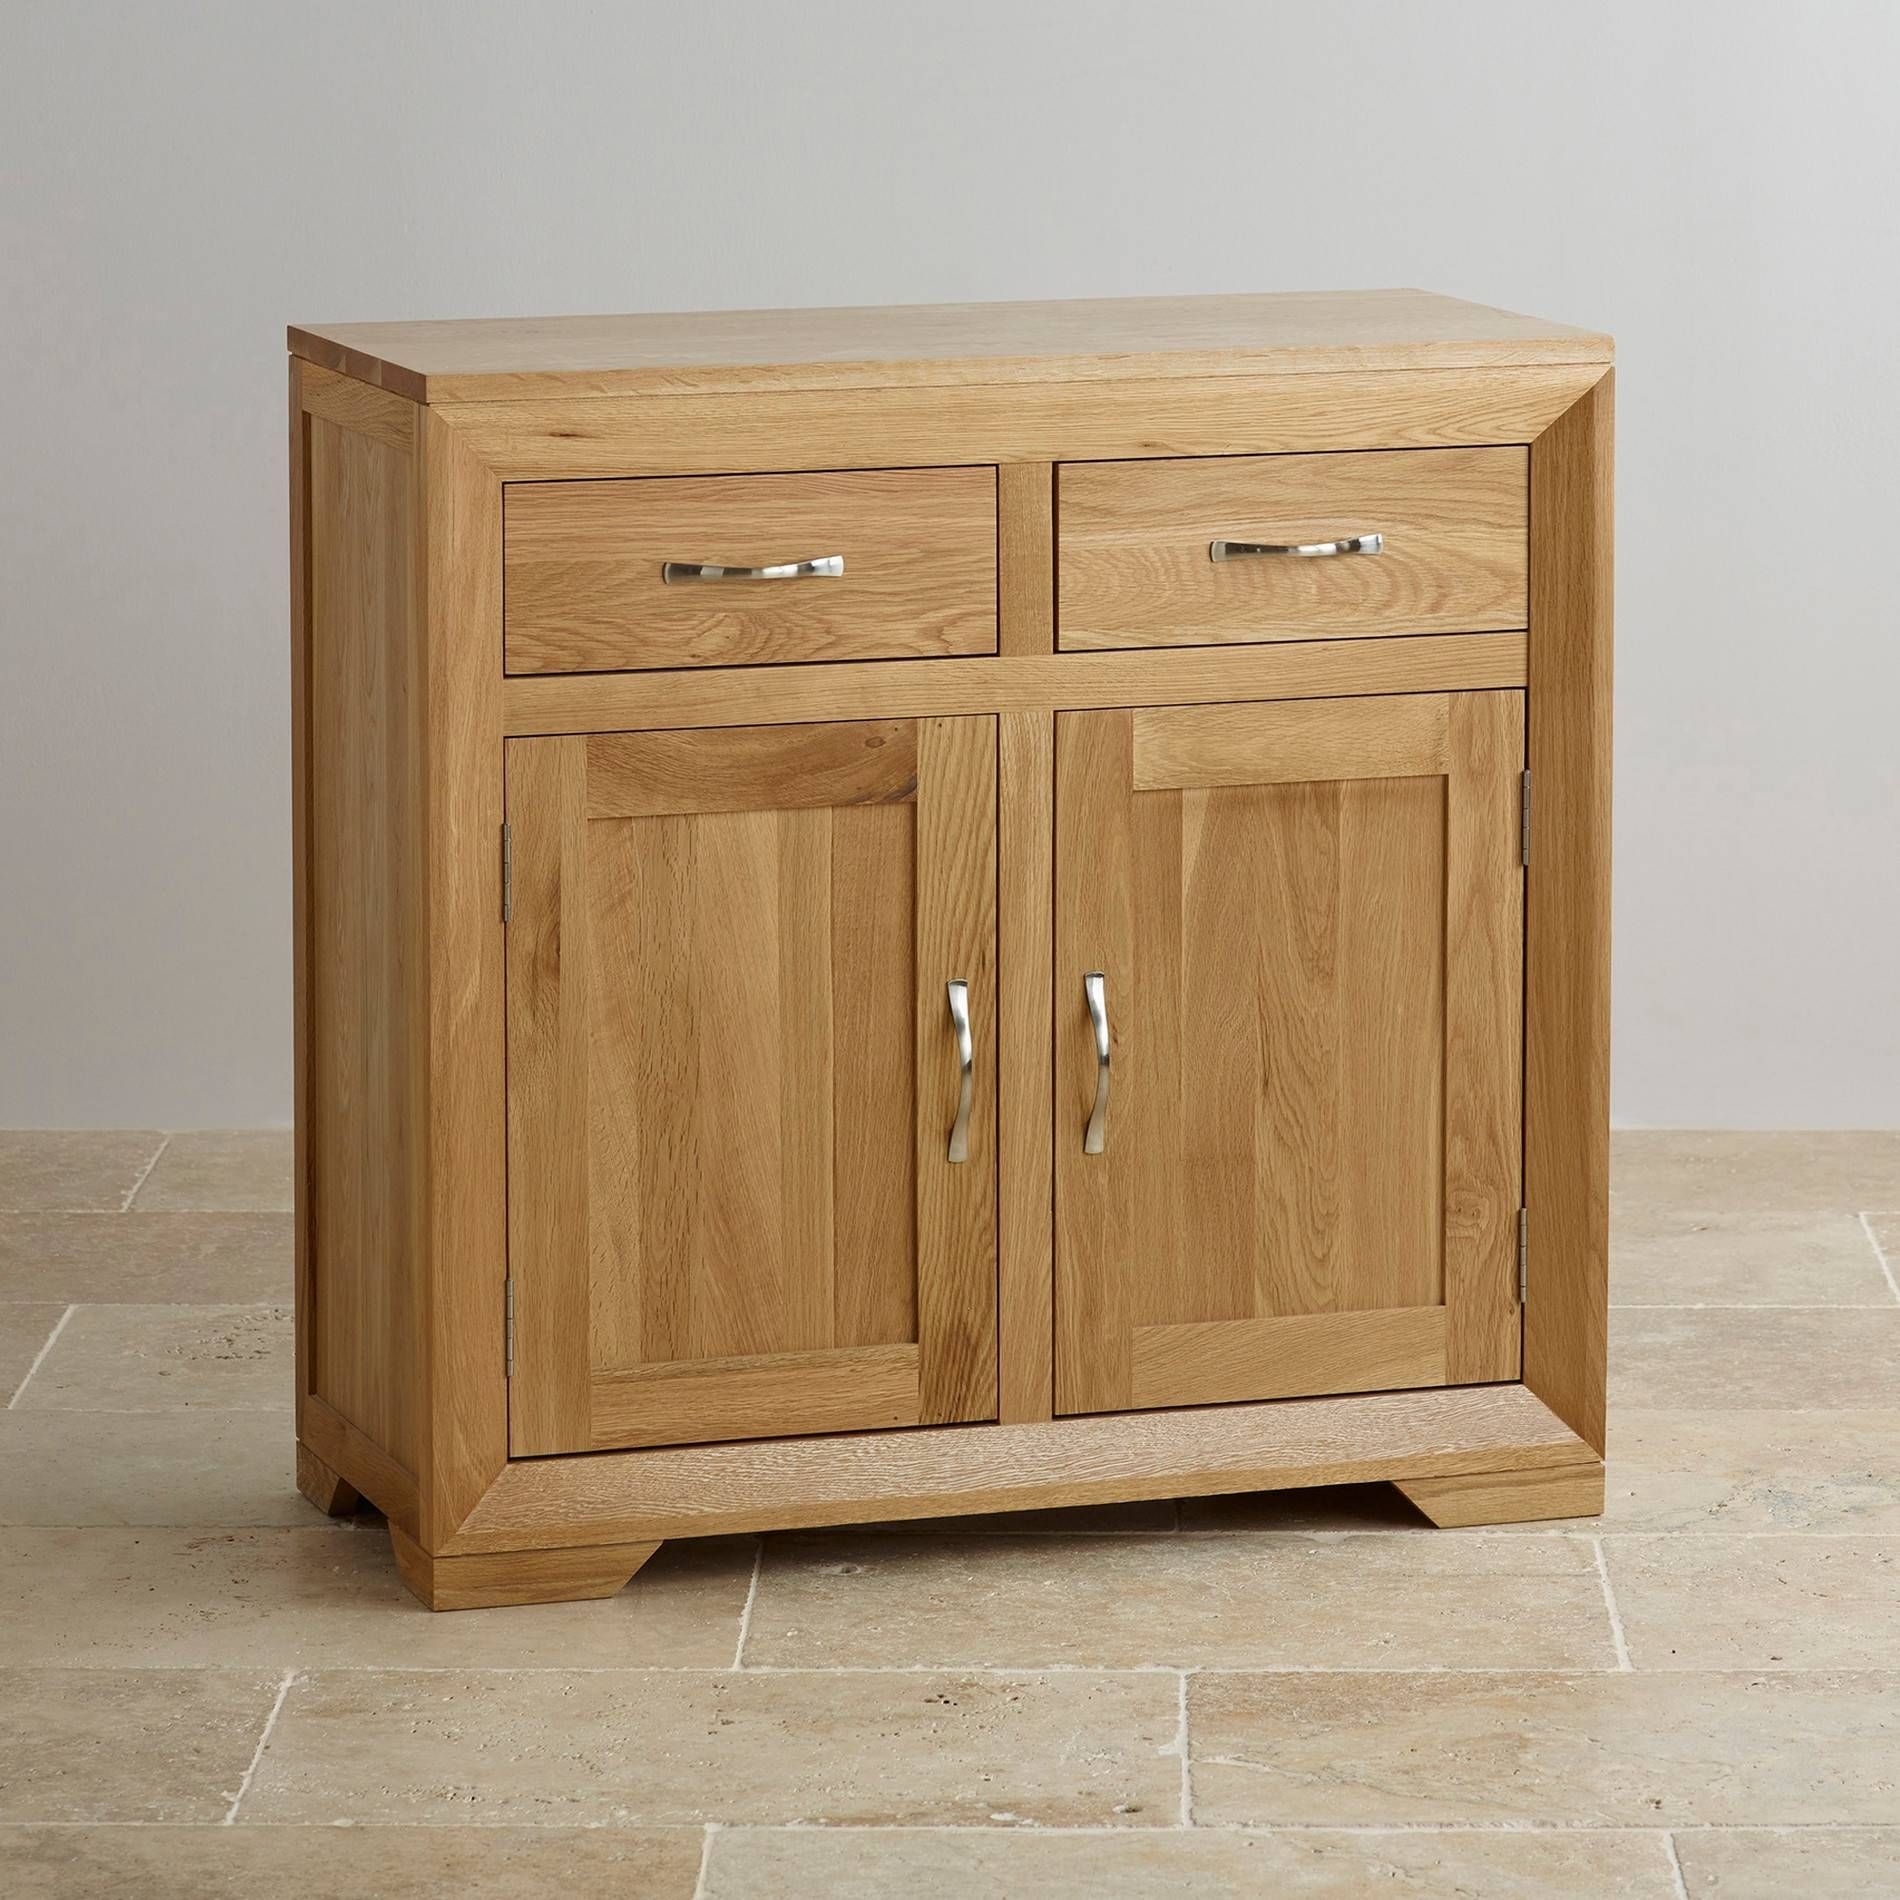 Elegant Small Solid Oak Sideboard – Buildsimplehome Pertaining To Best And Newest Small Oak Sideboards (View 10 of 15)